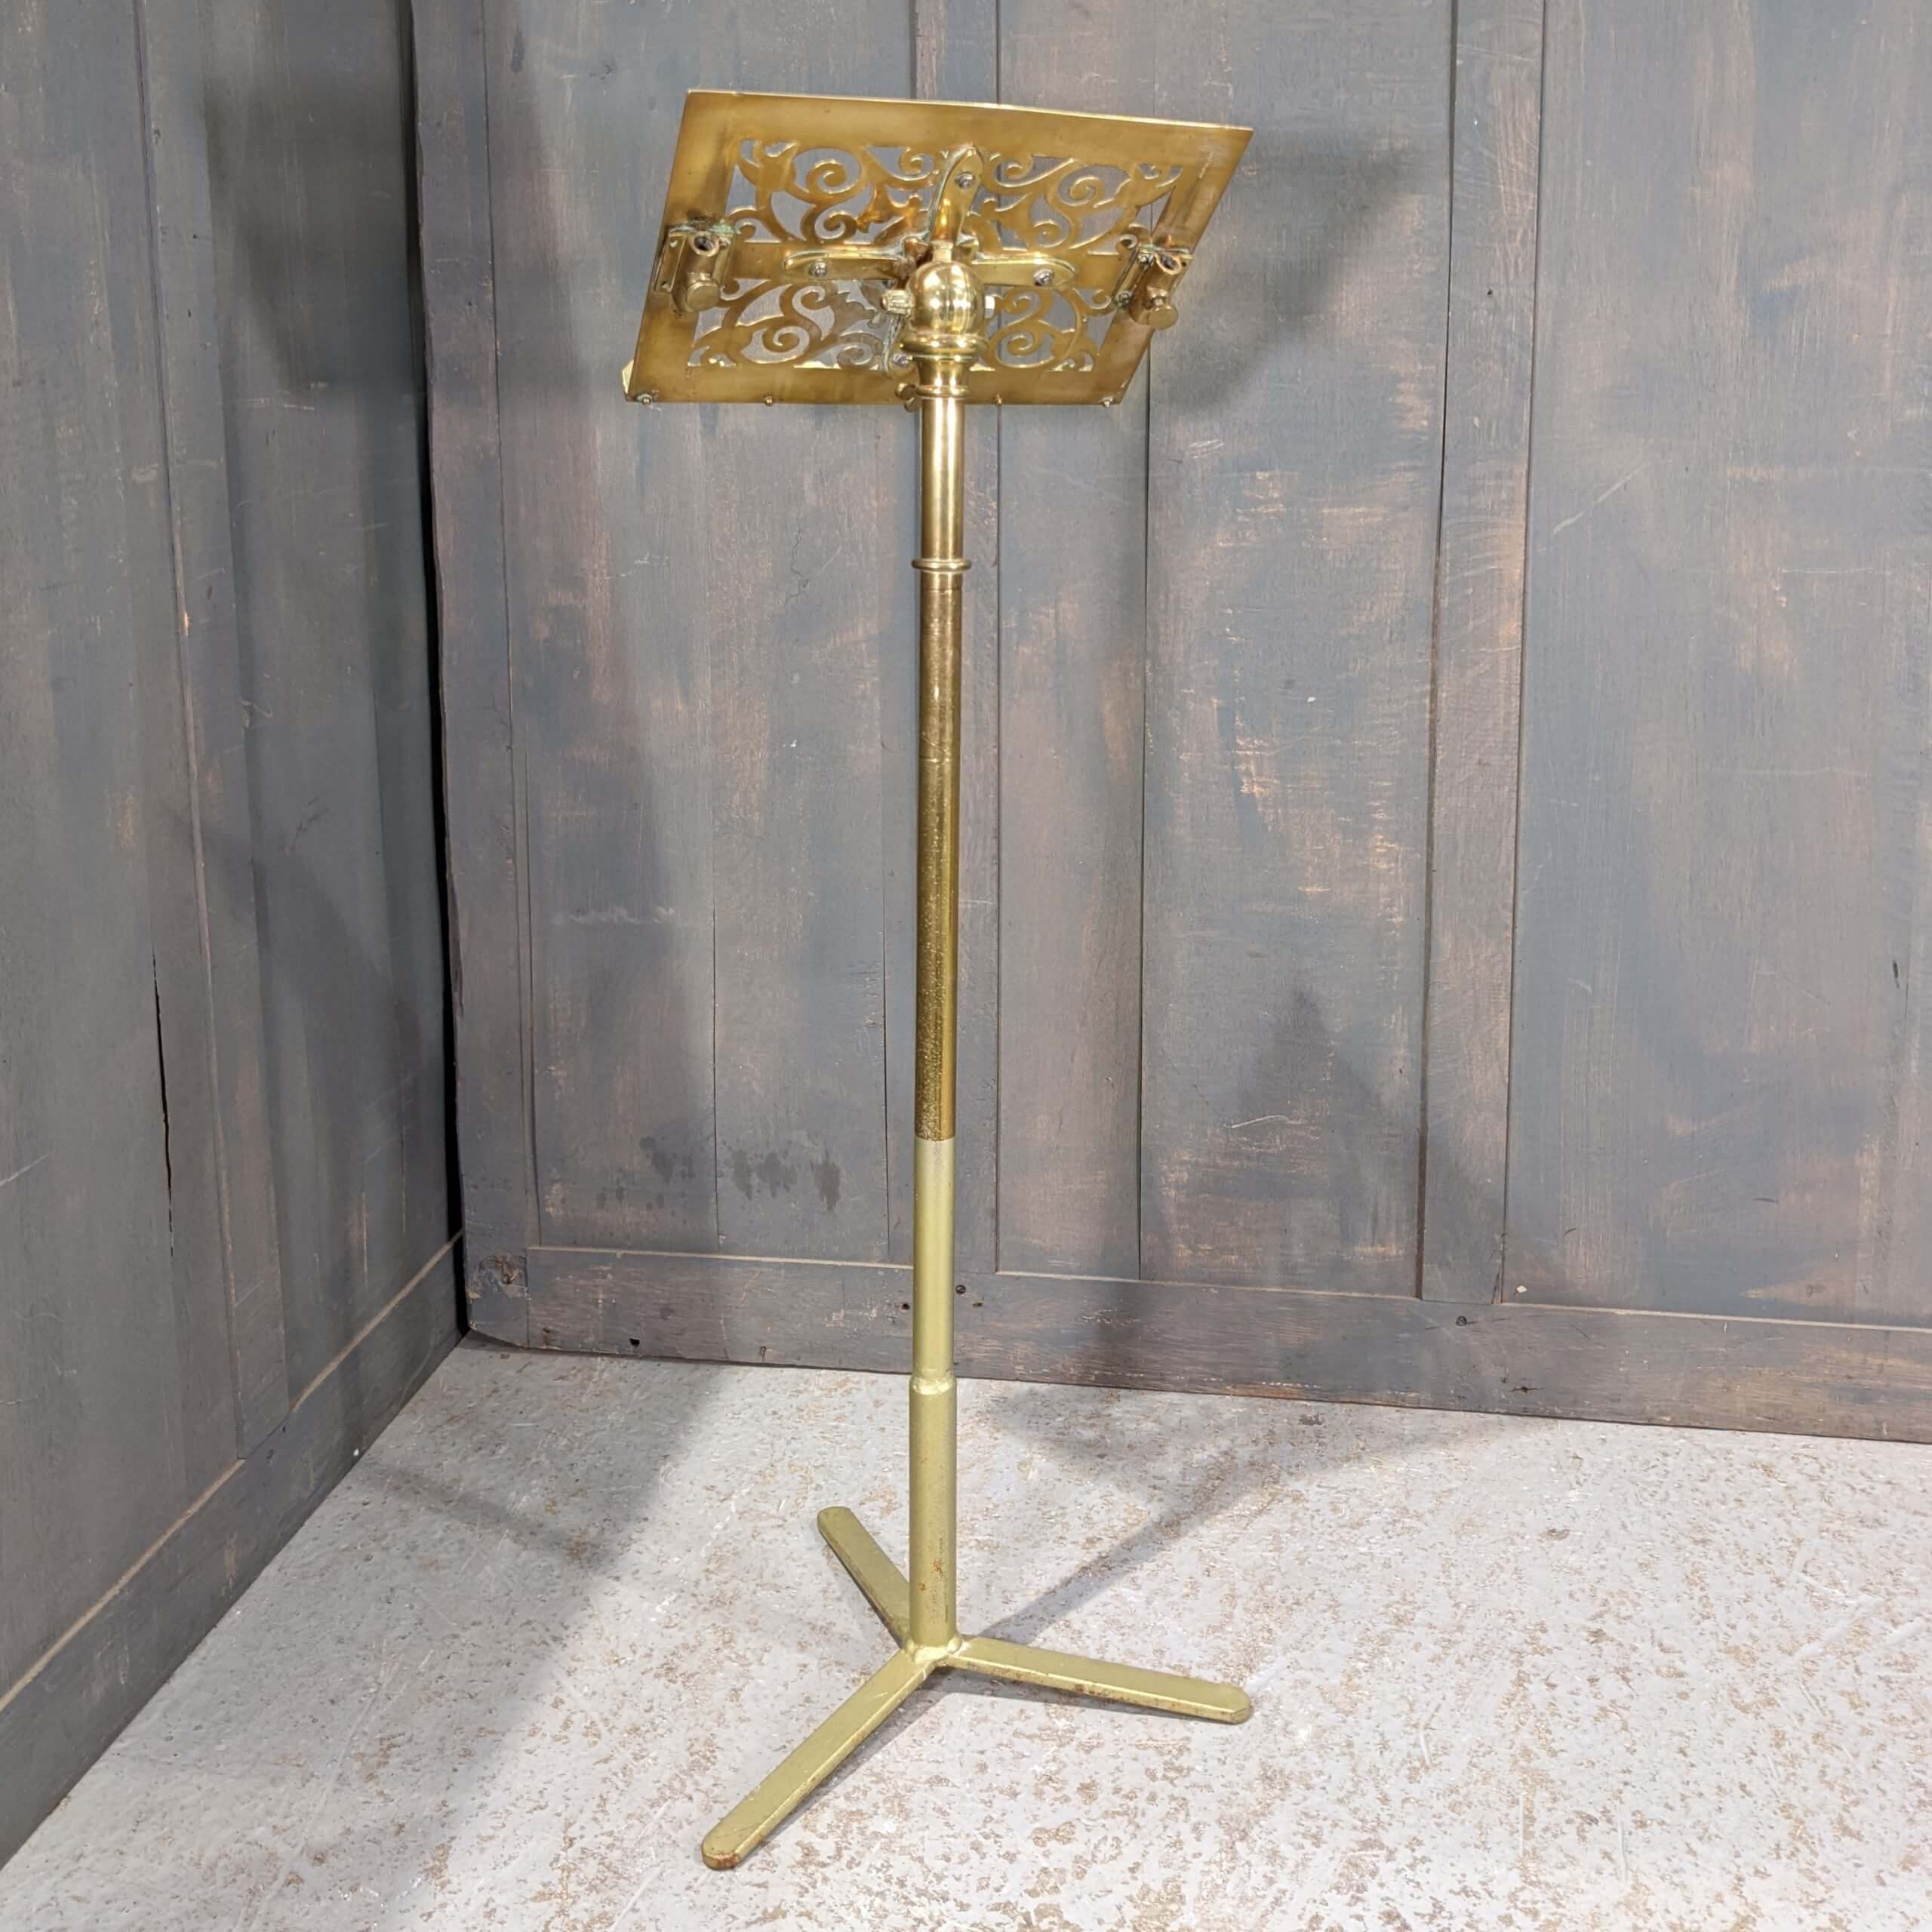 Smaller Height Ornate Brass & Steel Church Lectern Music Stand (SOLD) -  Antique Church Furnishings